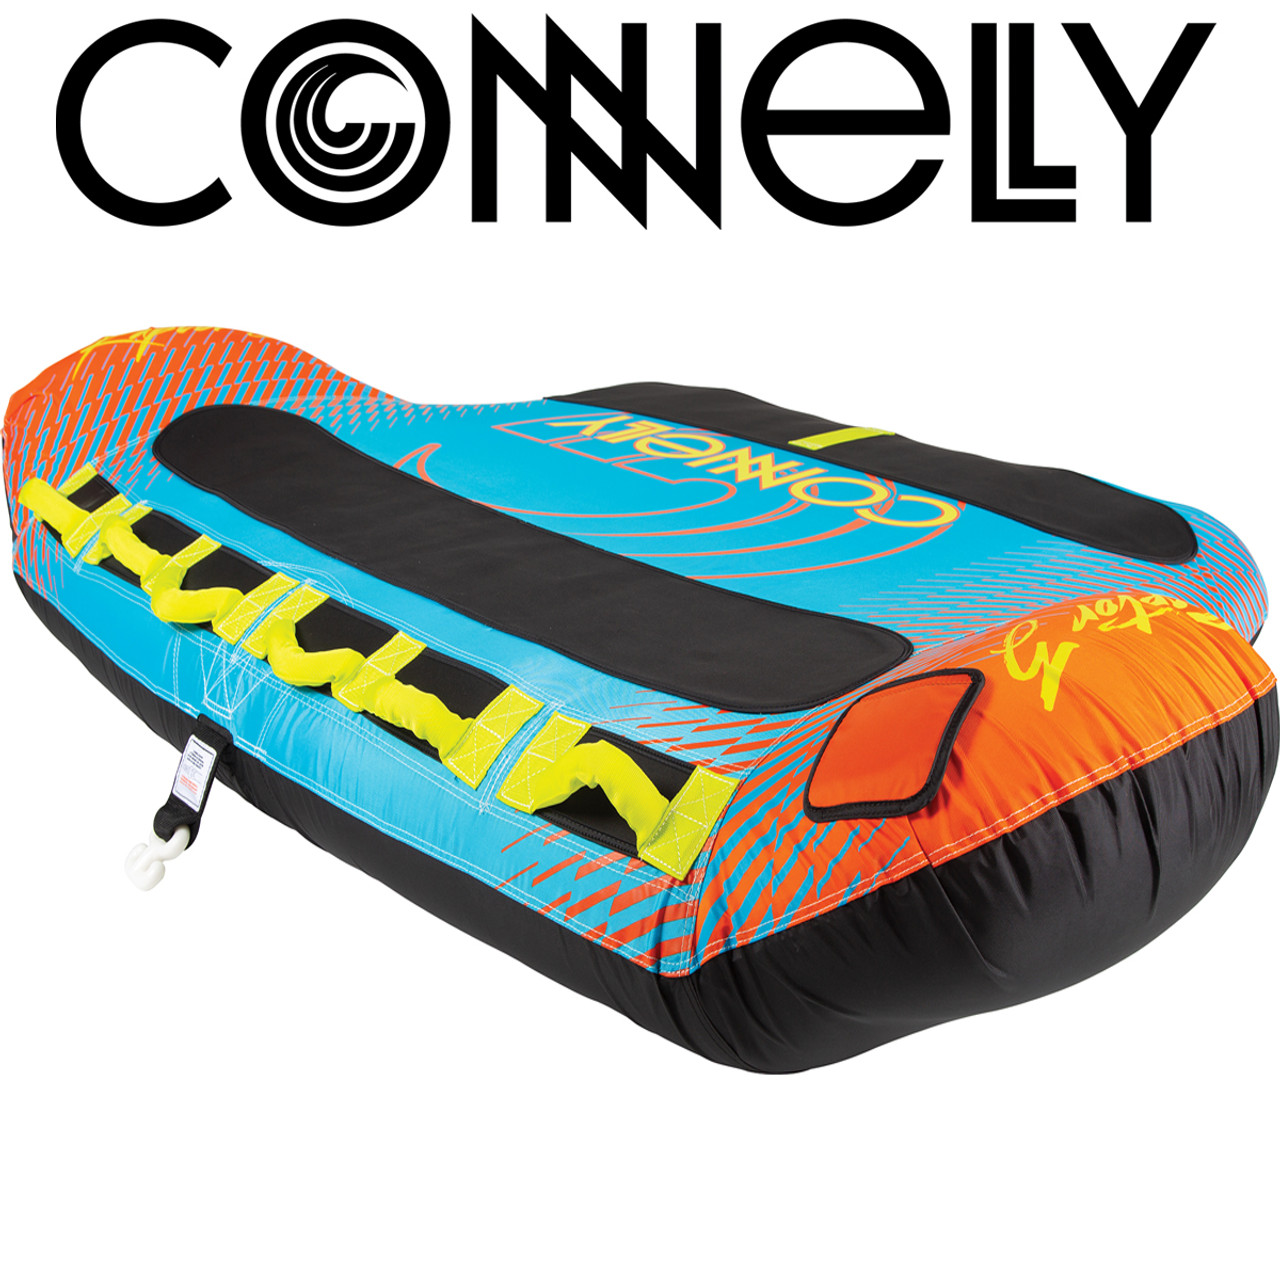 Connelly Raptor 3 / 3-Person Towable Tube